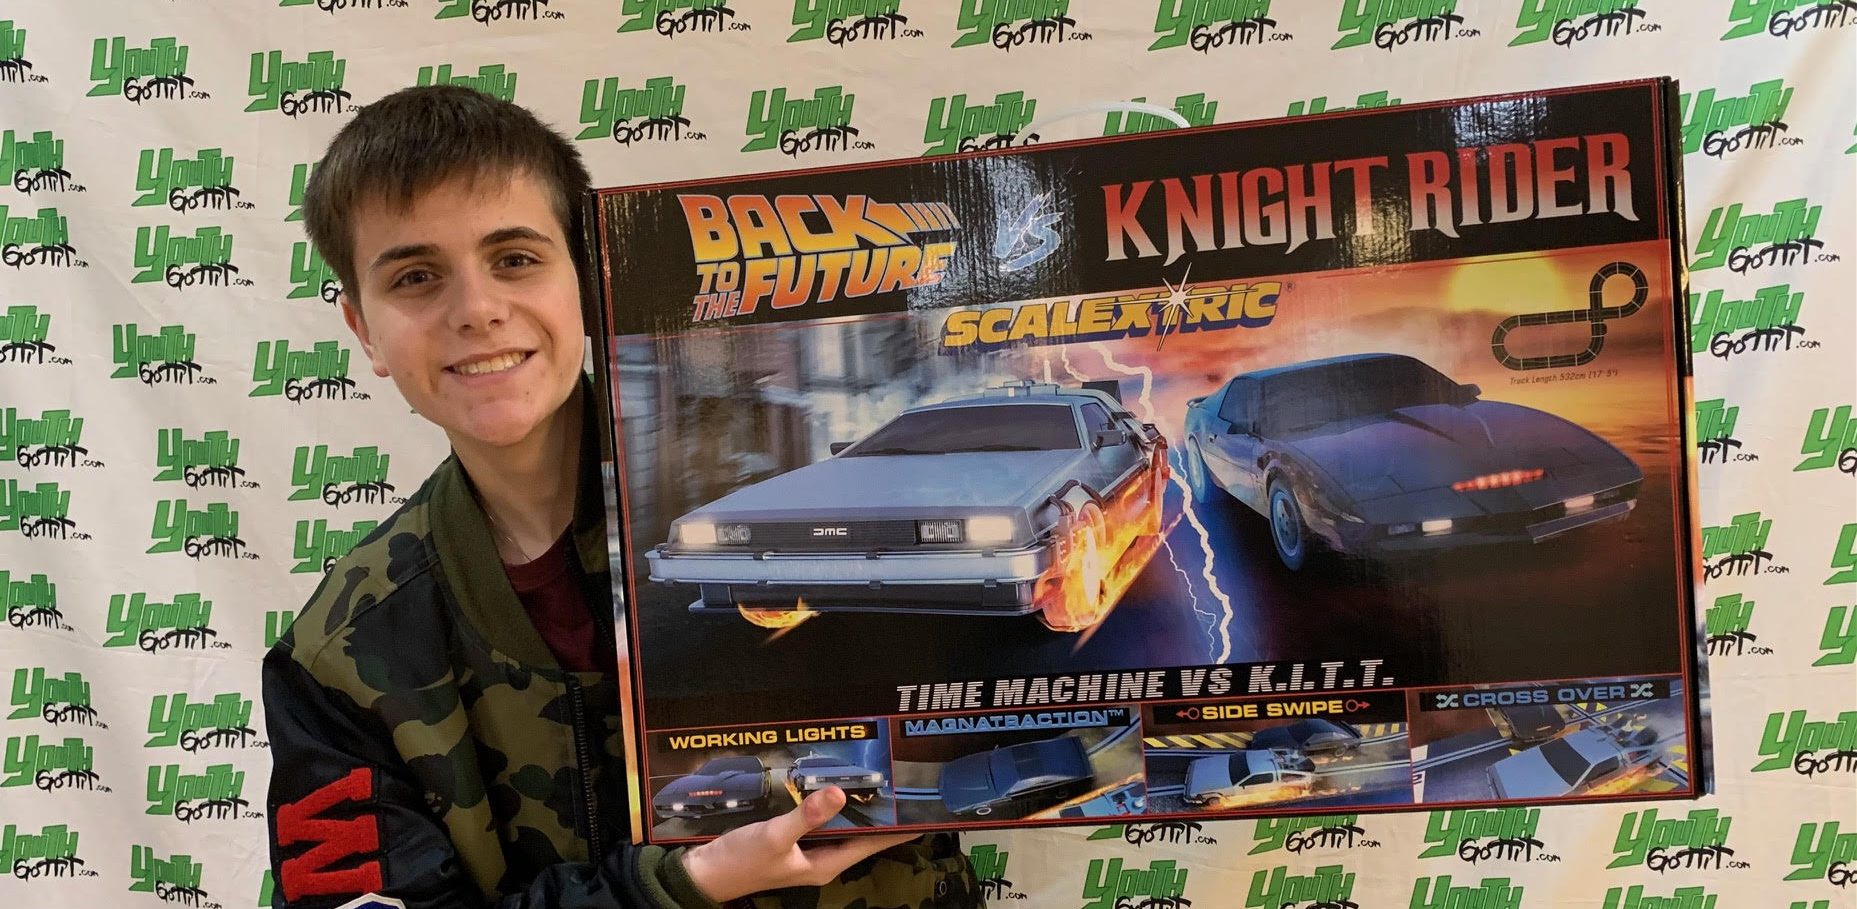 Hornby Hobbies Ltd – Scalextric Back to the Future vs Knight Rider